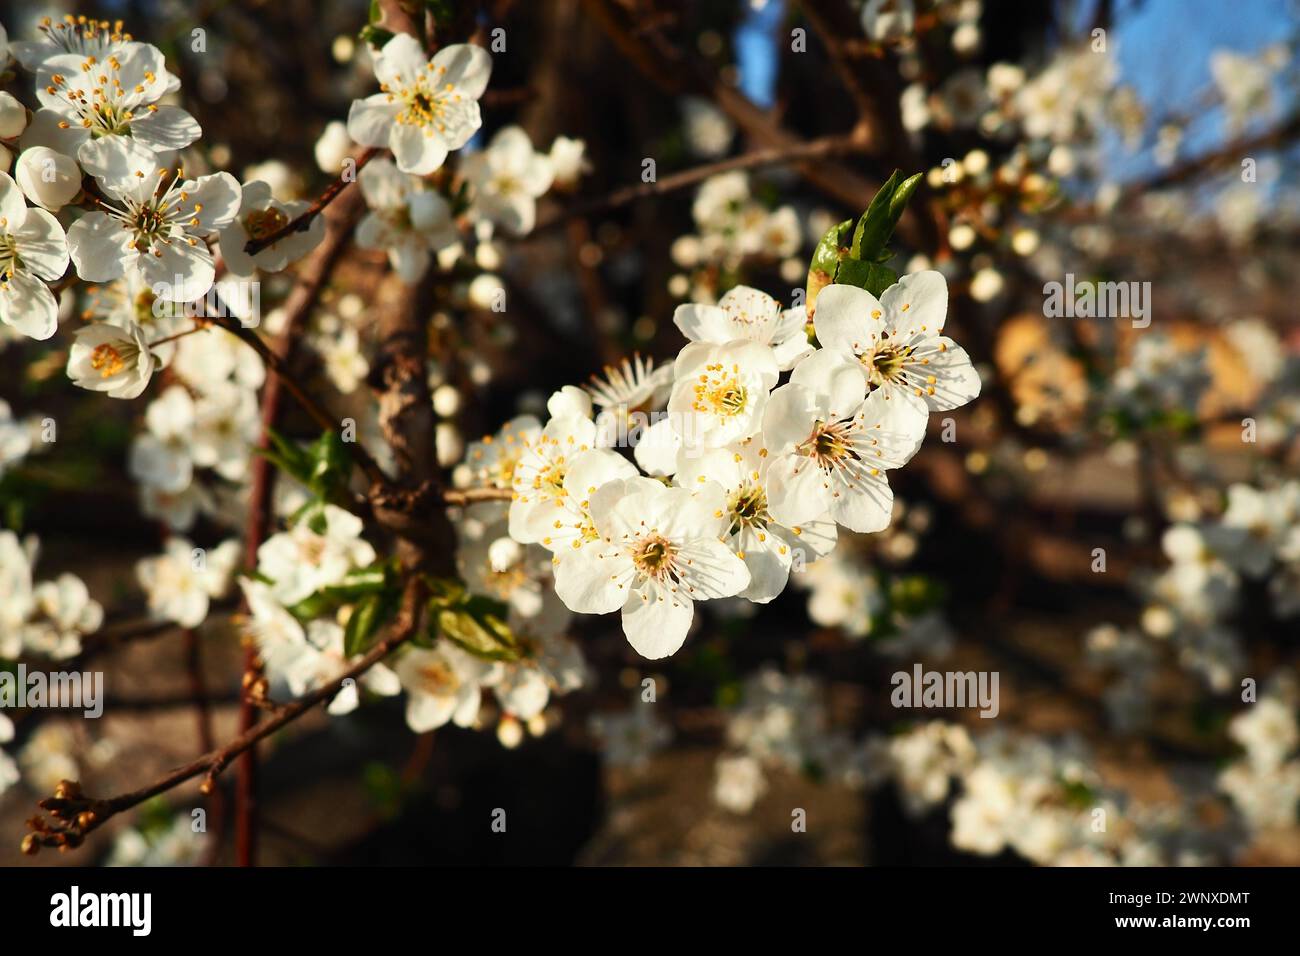 Blossoming of cherries, sweet cherries and bird cherry. Beautiful fragrant white flowers on the branches during the golden hour. Spring white flowers Stock Photo